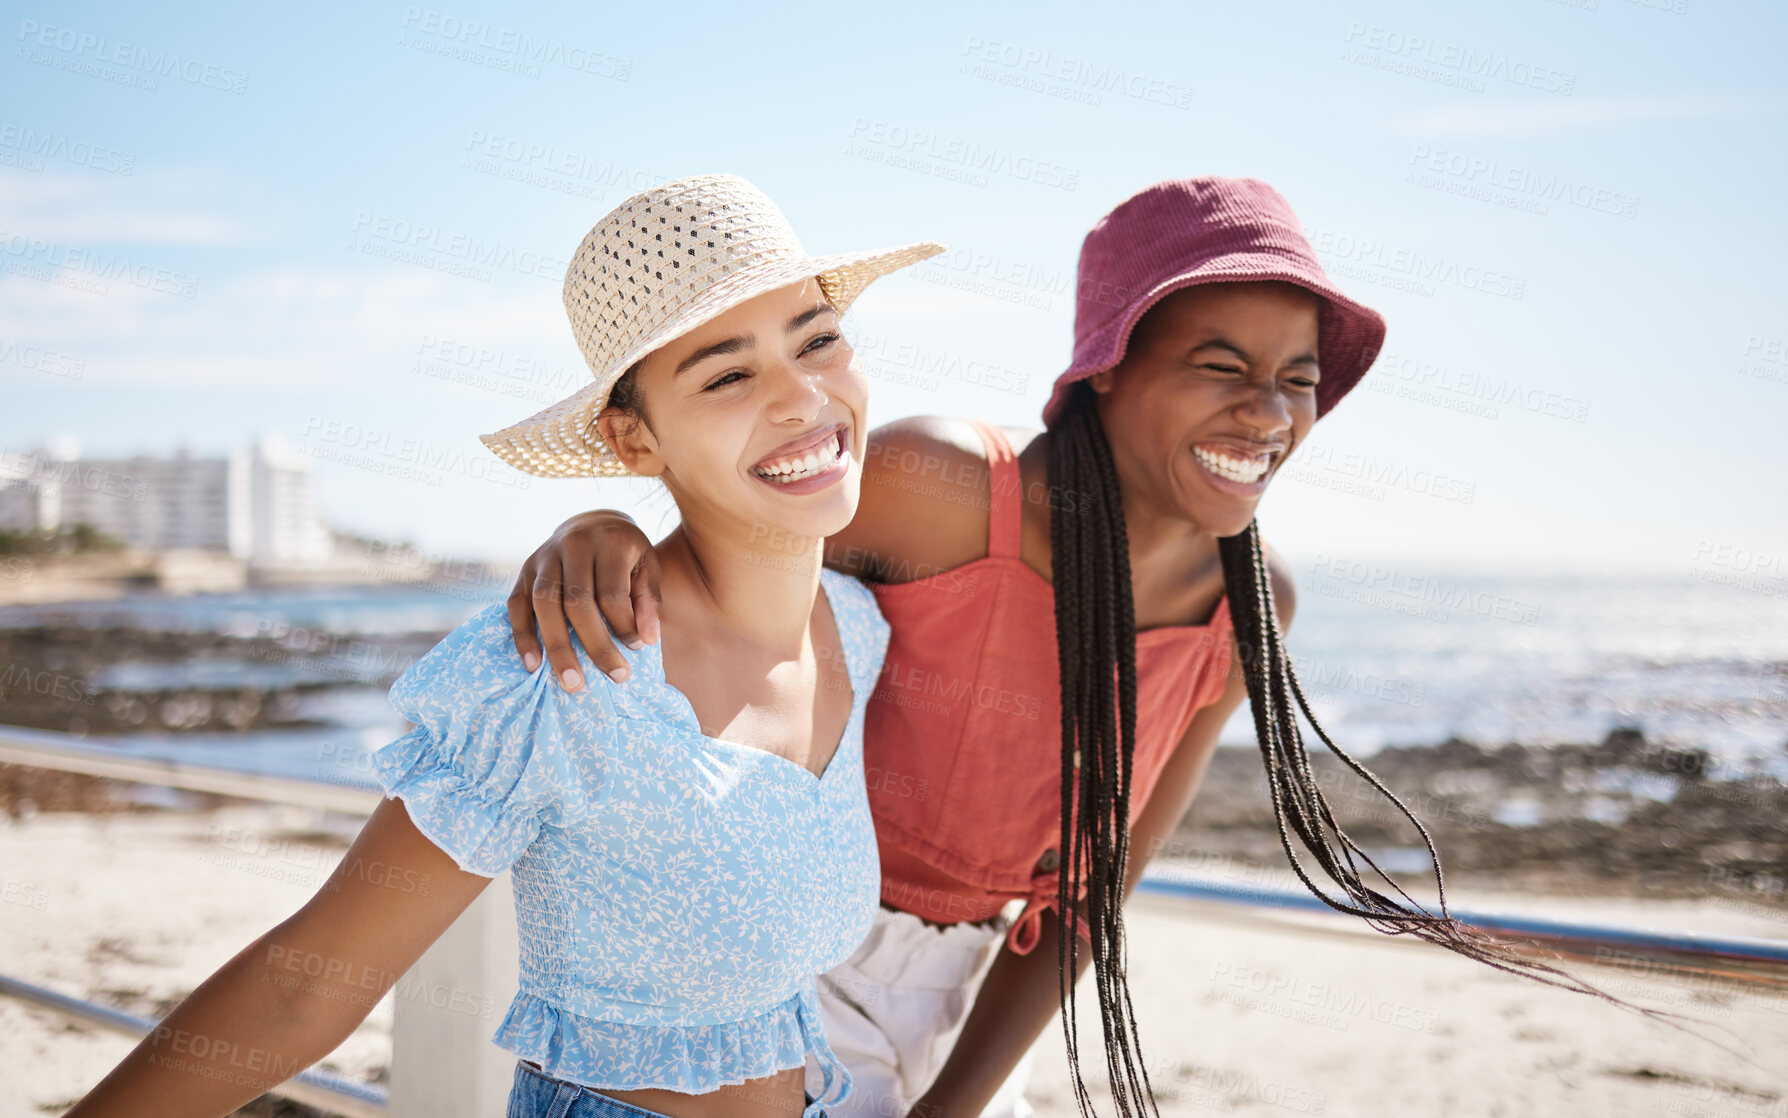 Buy stock photo Smile, love and gay or lesbian with black couple women bonding at beach or sea in summer. Freedom, happy and LGBT portrait of fun friends or girlfriend on holiday, vacation or honeymoon by the coast